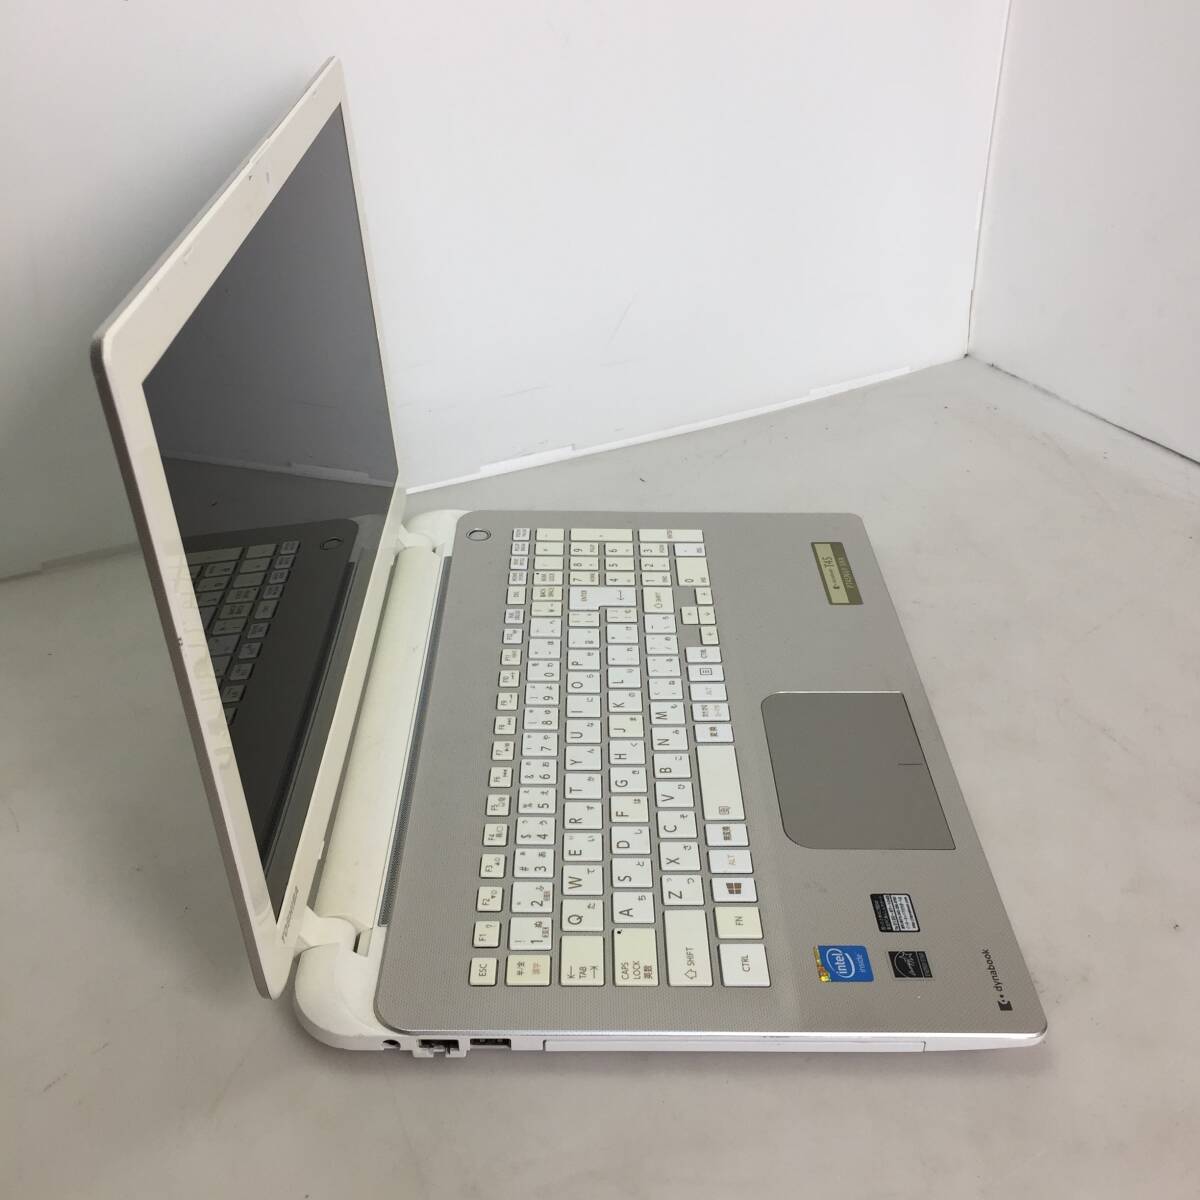  prompt decision *TOSHIBA dynabook T45/NGY PT45NGY-SHA Note PC Celeron 2957U 1.40GHz[ junk ]